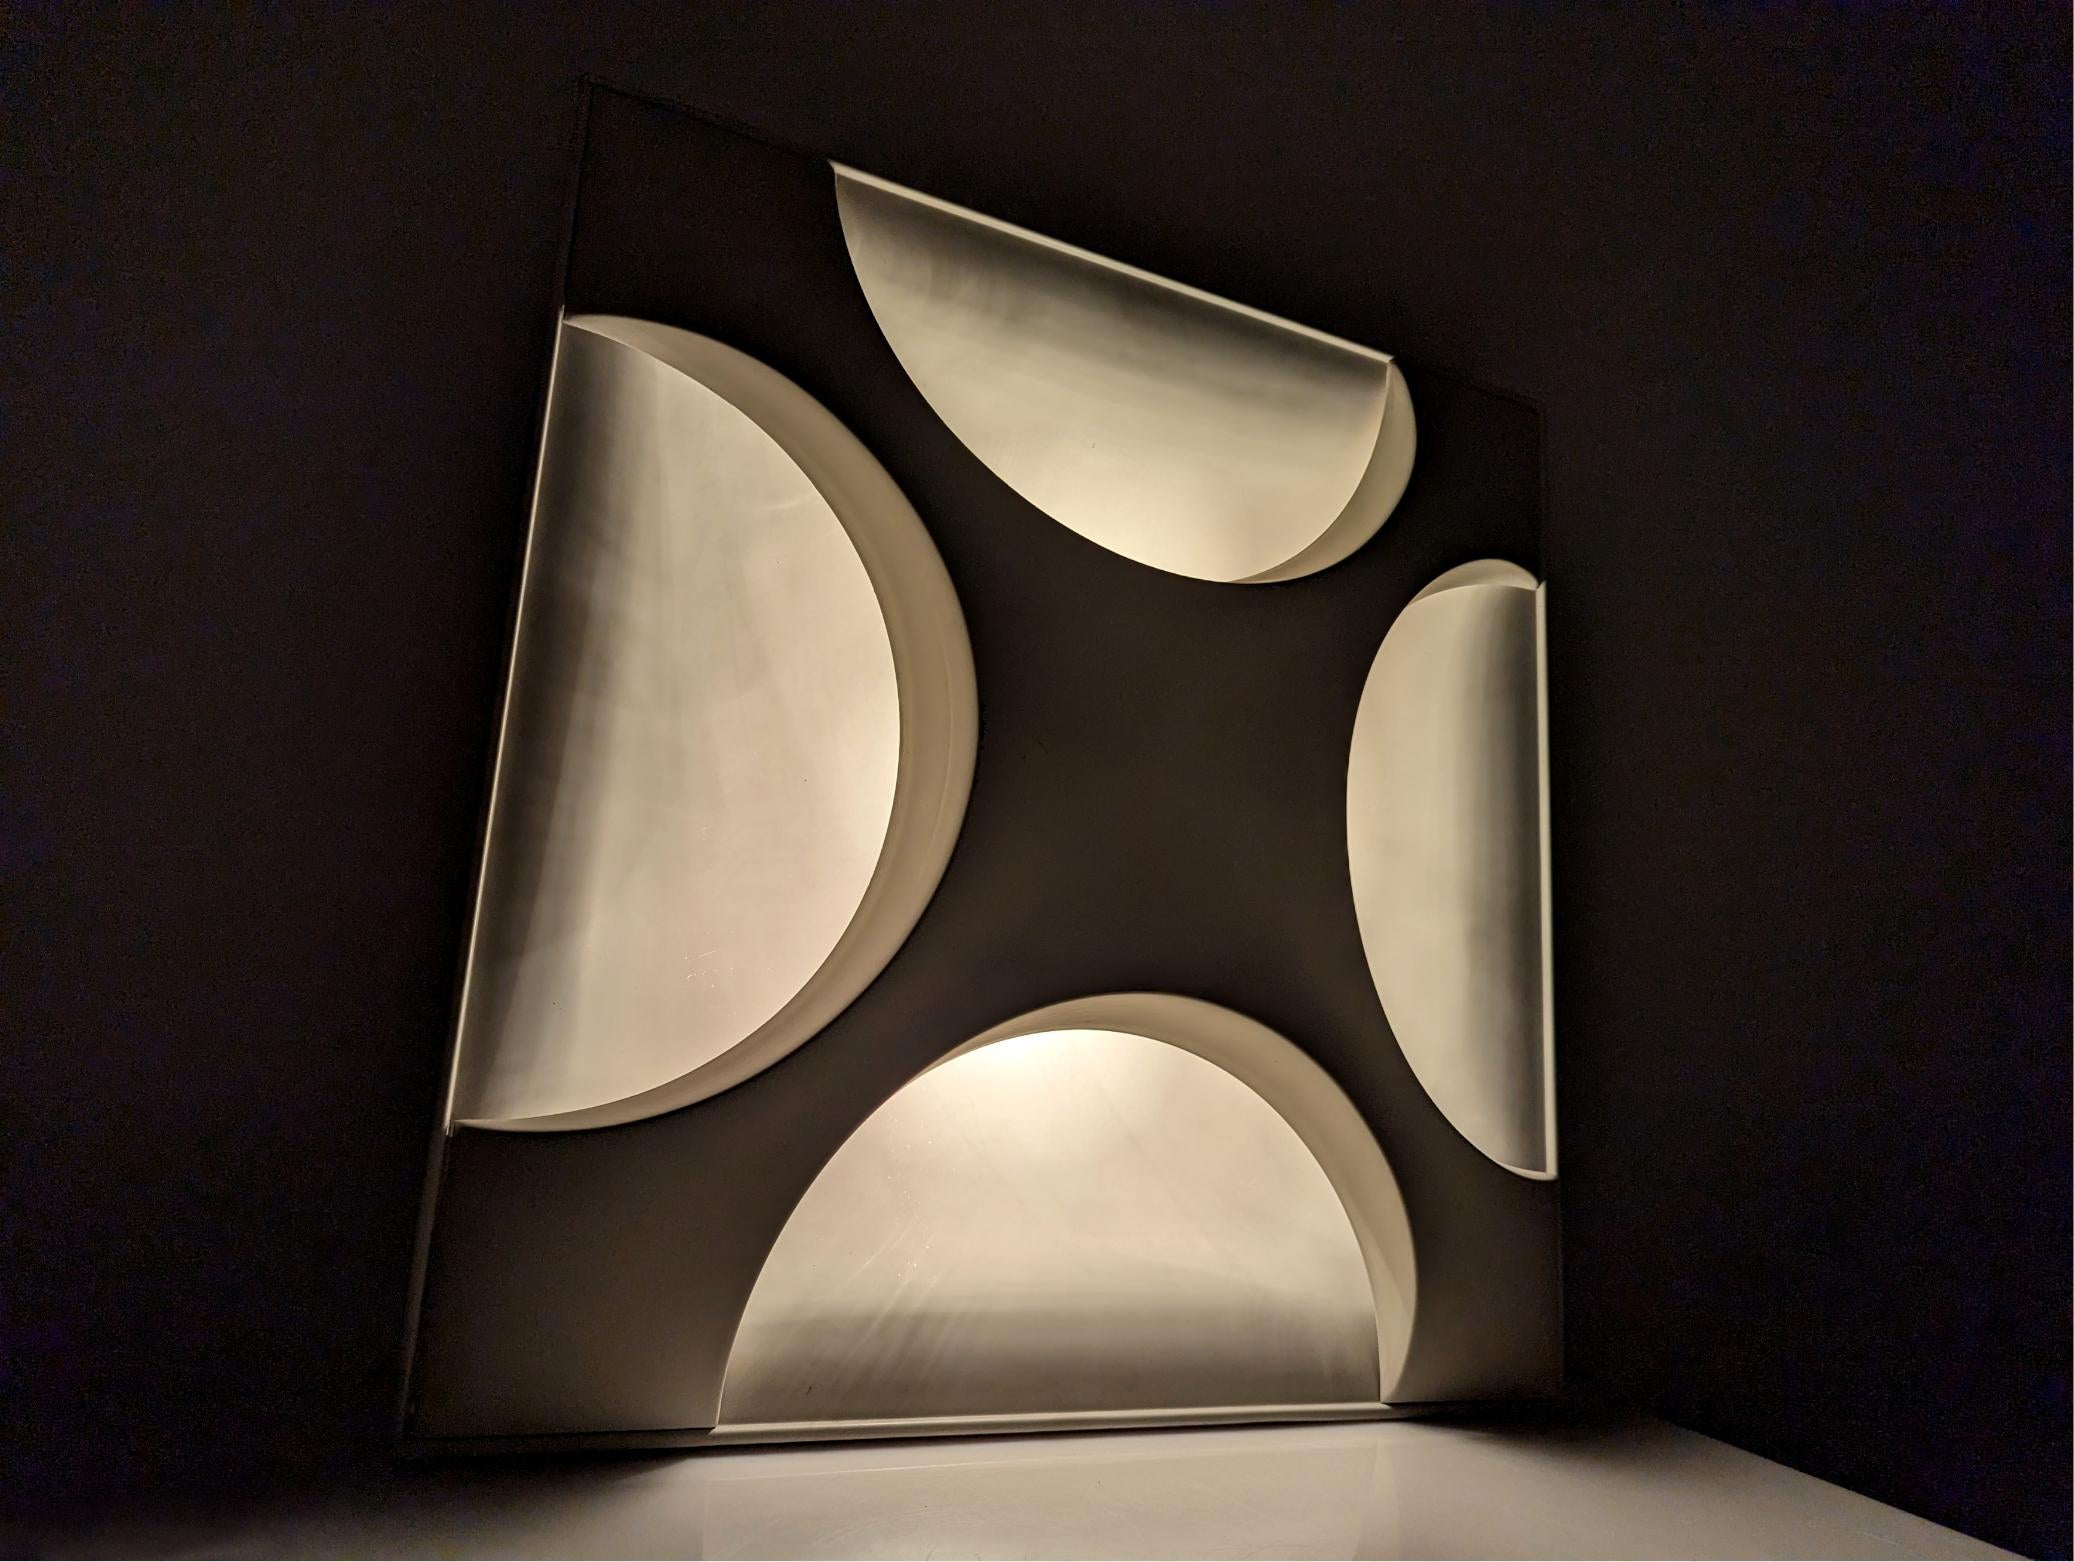 Ceiling / wall lamp designed by Dieter Witte and Rolf Krüger for the German house Staff Leuchten especially for the 1965 World's Fair in Munich.